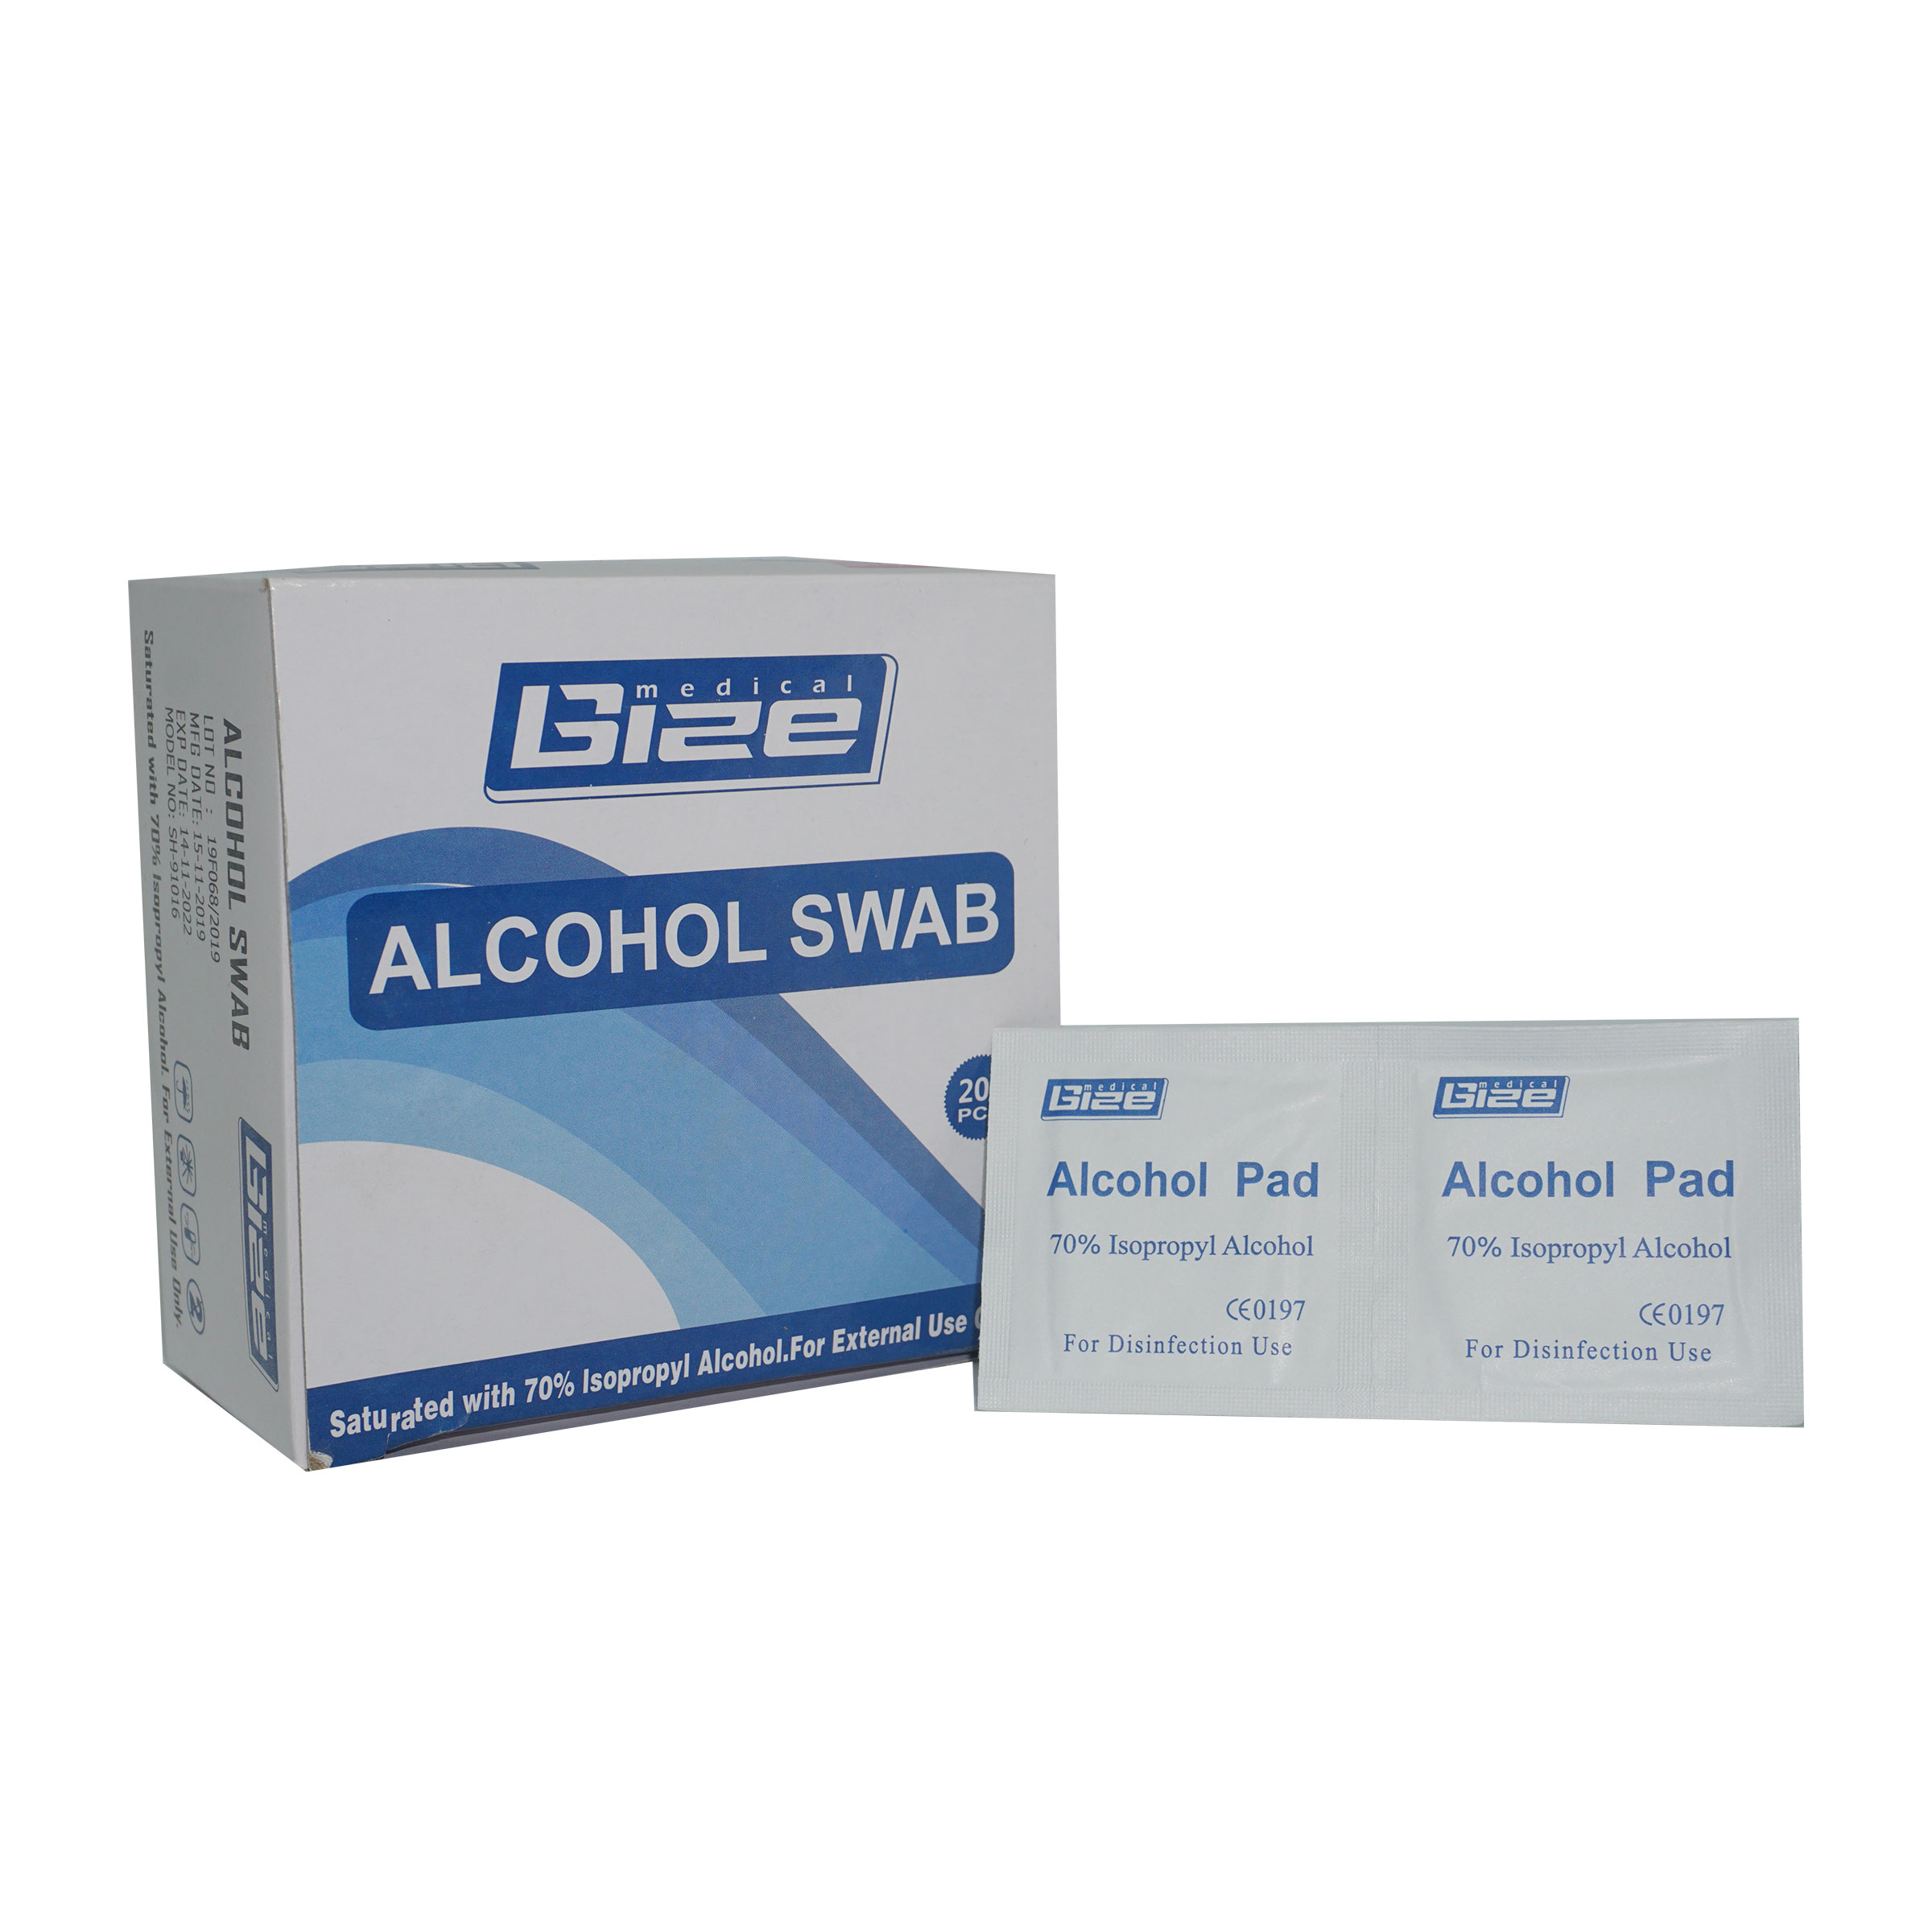 Alcohol Swab 200'S - Mx-Lrd product available at family pharmacy online buy now at qatar doha